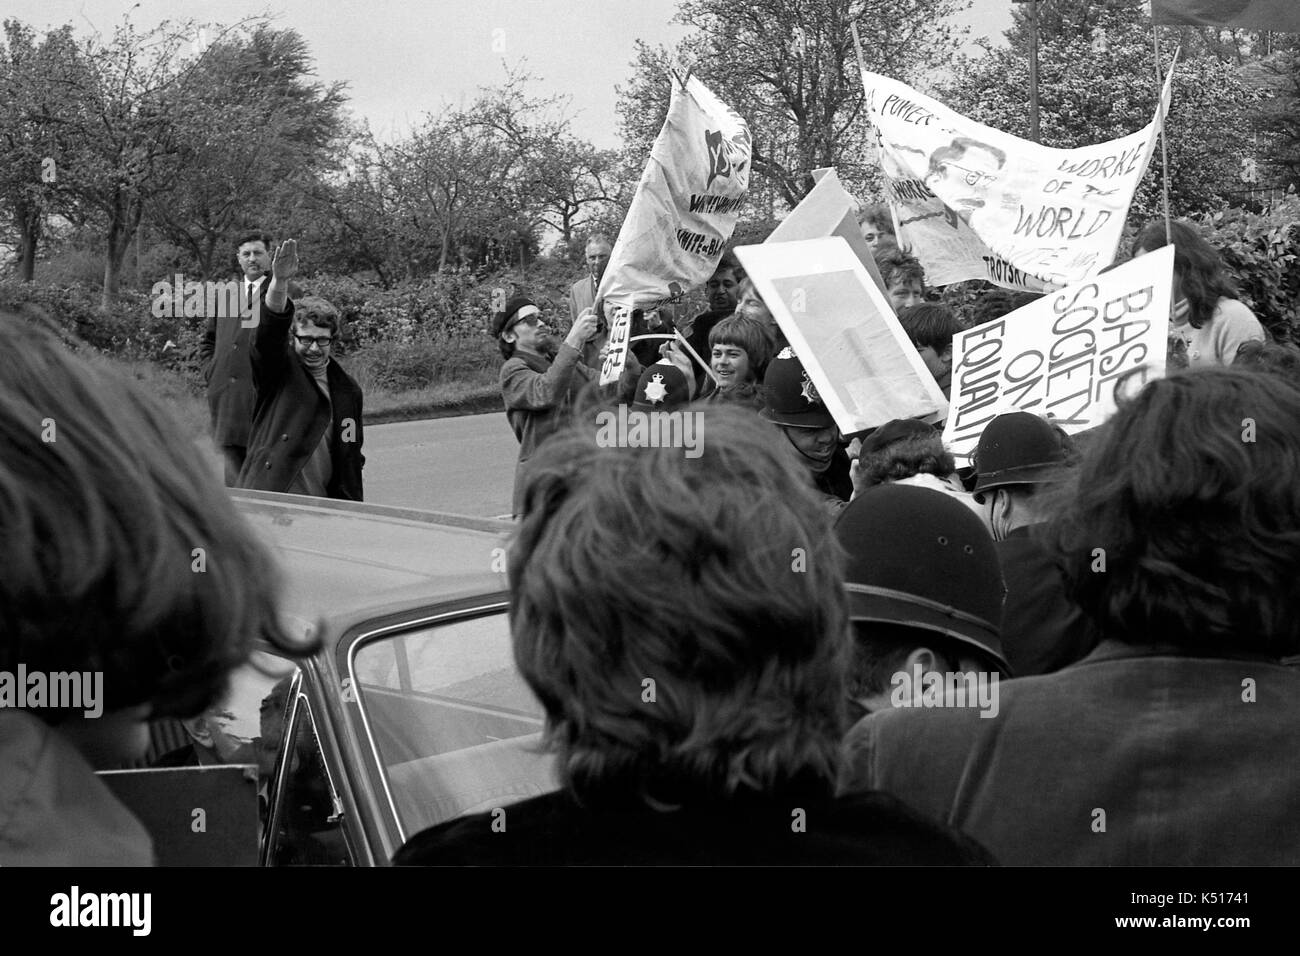 British MP Enoch Powell is confronted by anti-racism demonstrators as he arrives at a public meeting three weeks after his controversial speech on immigration that became known as the “rivers of blood” speech.  He drove to the meeting at Chippenham in Wiltshire on 11 May 1968 to find police guarding the gates as students from Bristol University picketed outside. Stock Photo